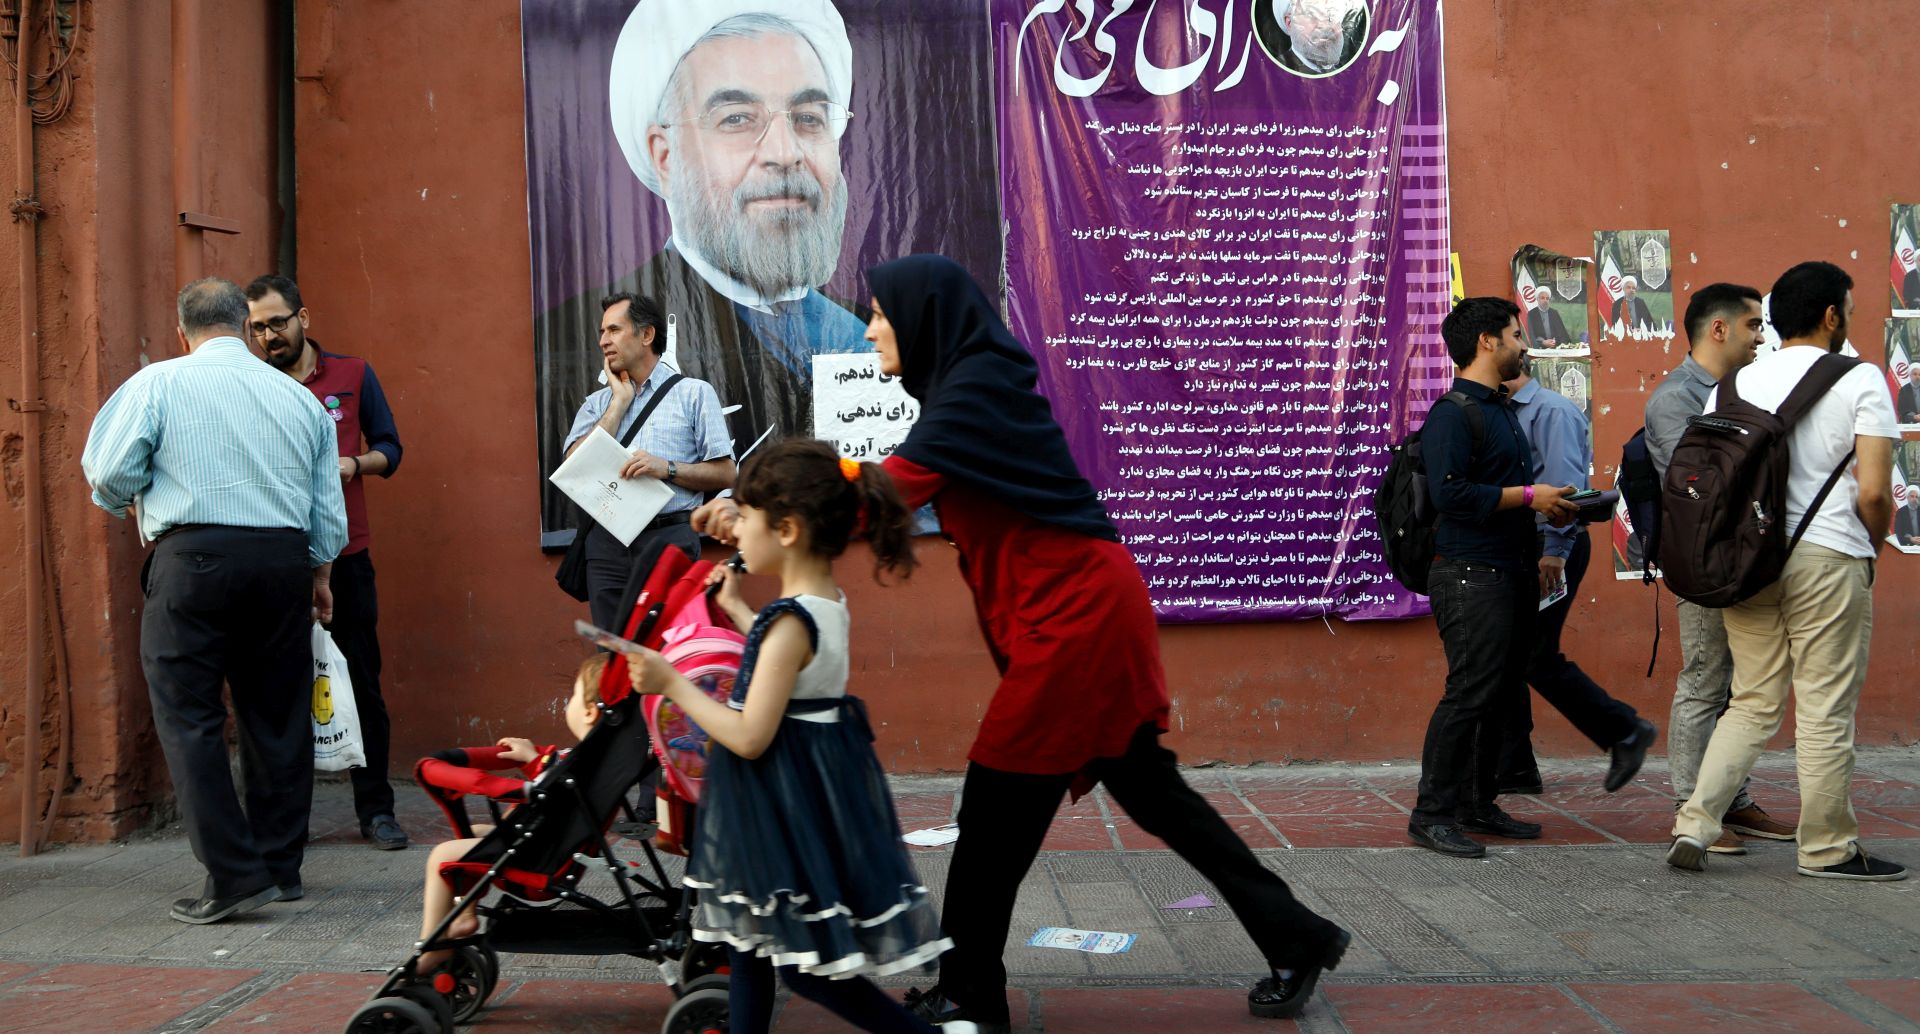 epa05966474 Iranians walk next to a huge election banner of current president and presidential candidate Hassan Rouhani at a street in Tehran, Iran, 15 May 2017. Media reported that conservative presidential candidate Ebrahim Raisi is the main contender against president Hassan Rouhani in the upcoming presidential election. Iranians will go to the poll for the presidential election on 19 May 2017.  EPA/ABEDIN TAHERKENAREH